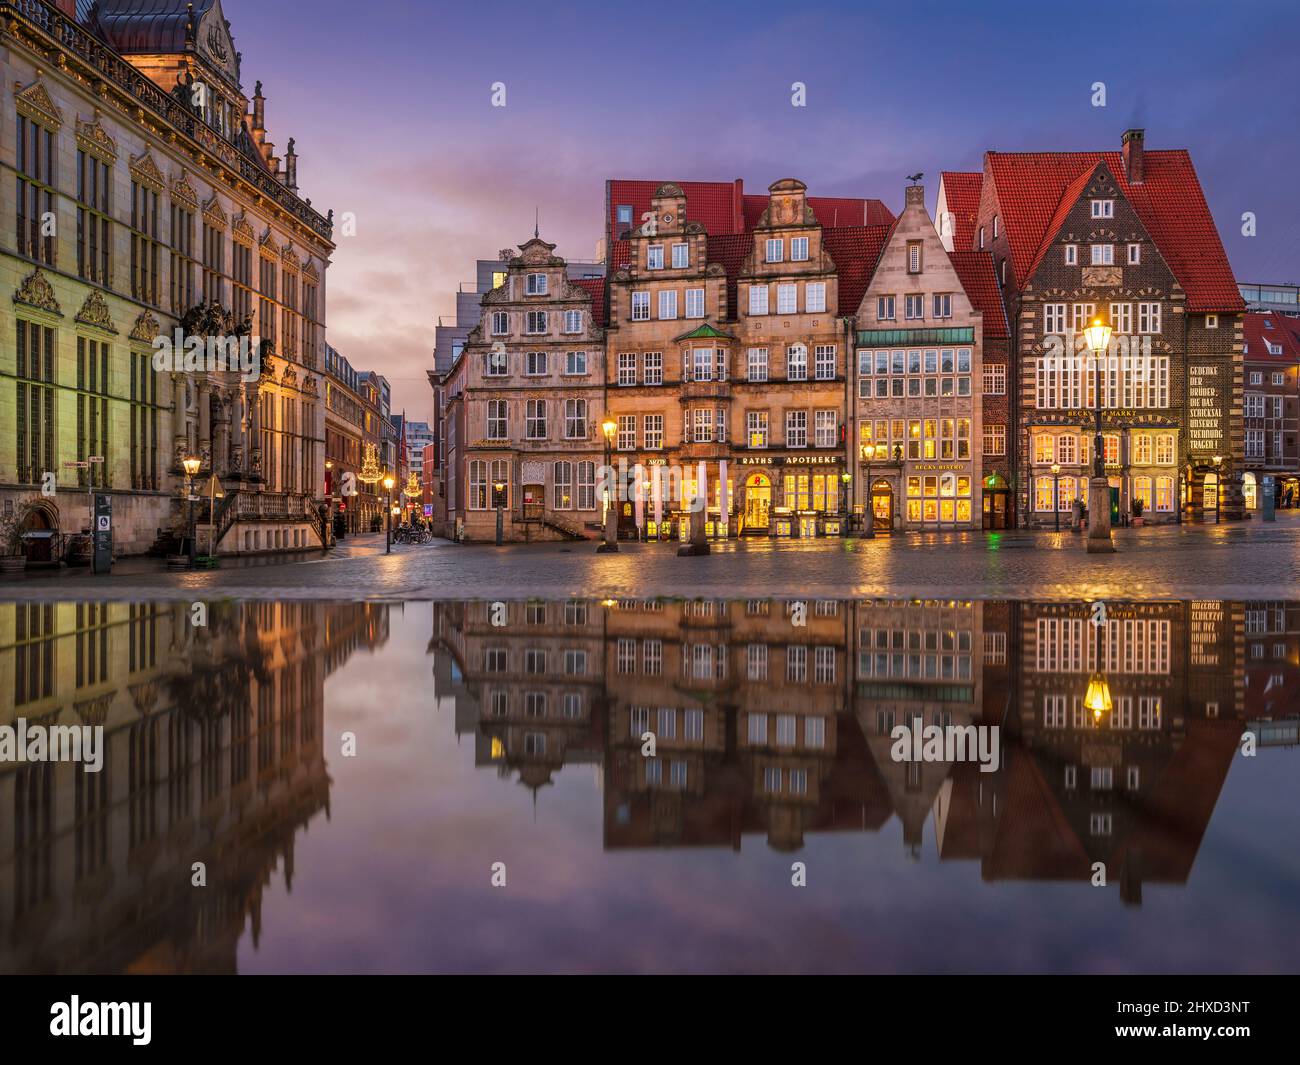 Market square of Bremen, Germany at night Stock Photo